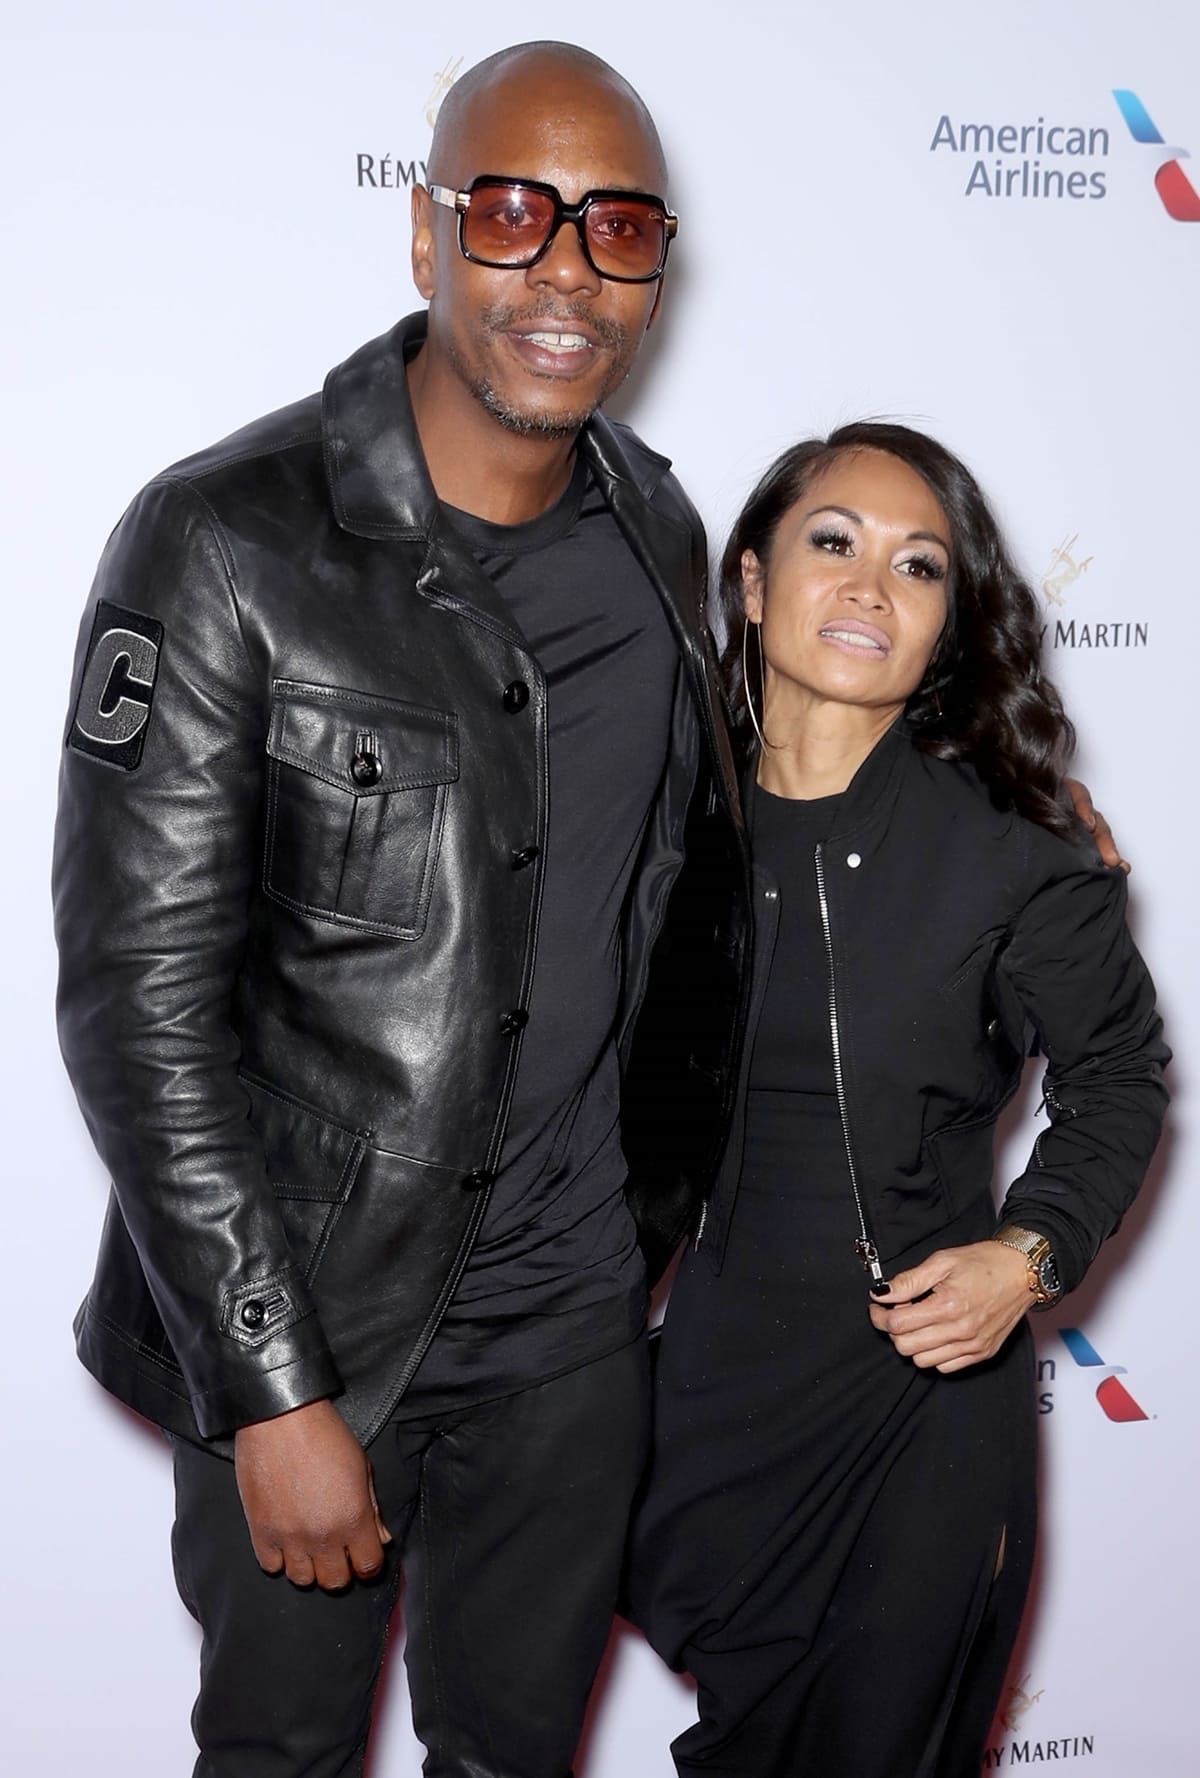 Comedian Dave Chappelle and his wife Elaine Chappelle have been together since the 90s but have kept their relationship and family life extremely private